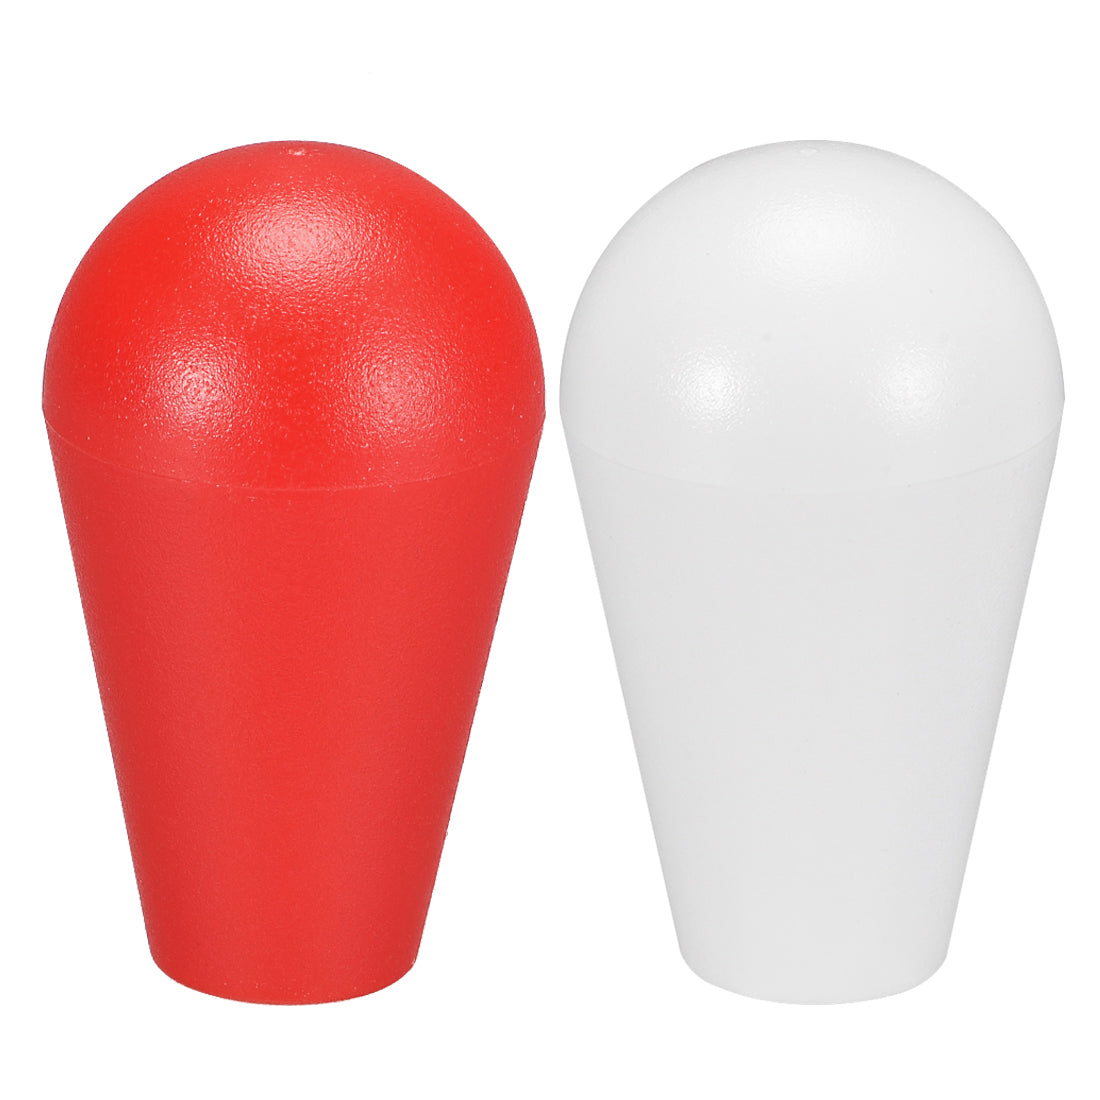 uxcell Uxcell Ellipse Oval Joystick Head Rocker Ball Top Handle American Type Arcade Game DIY Parts Replacement White Red 2Pcs